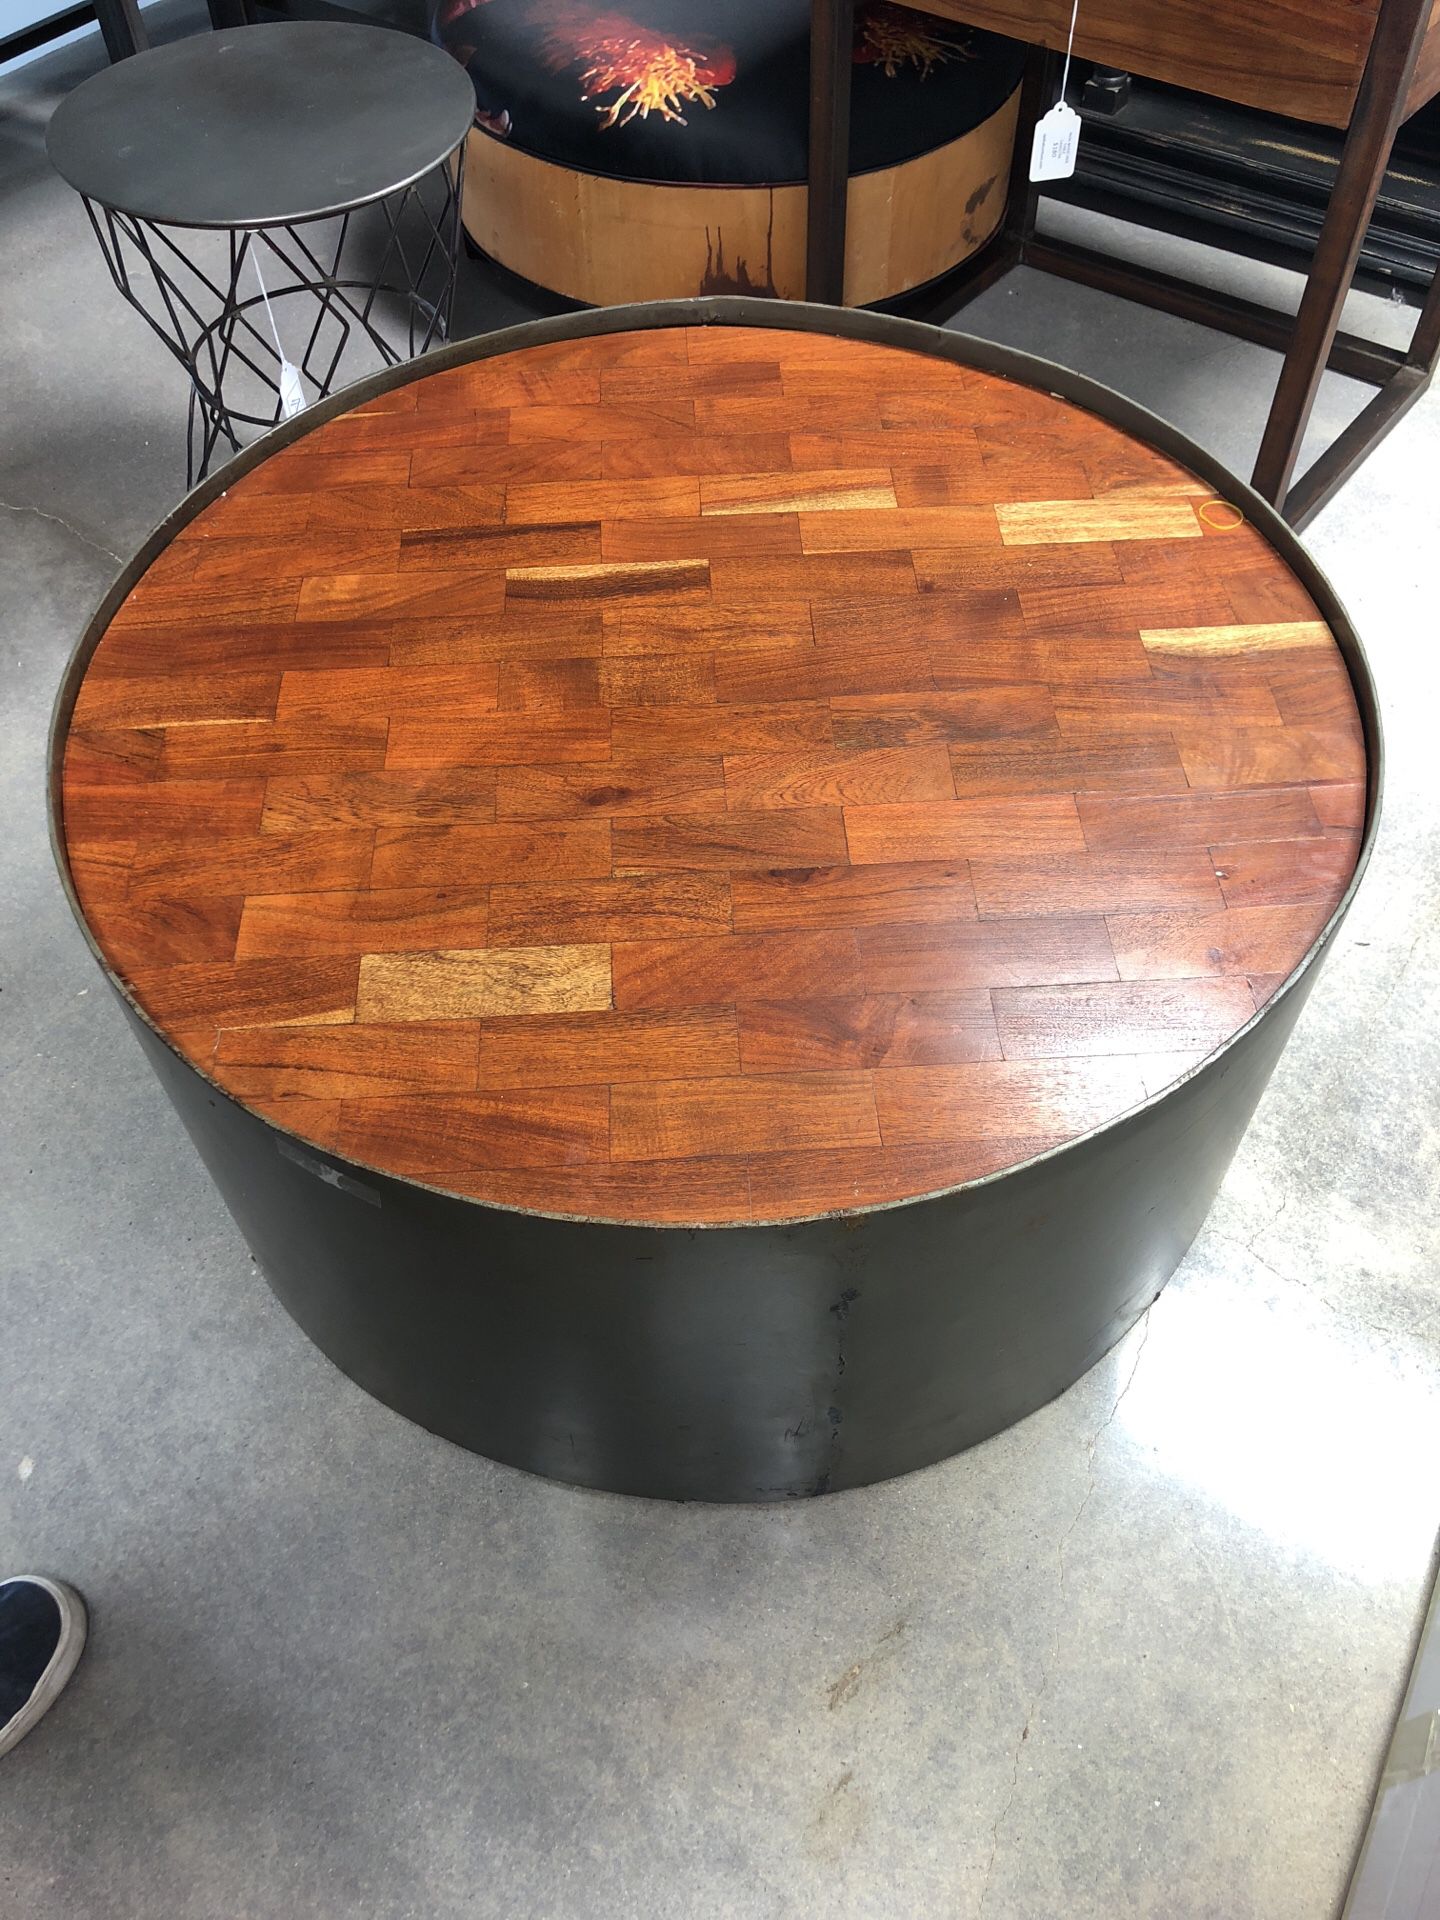 Large round coffee table - 35 1/2” x 35 1/2” x 16”